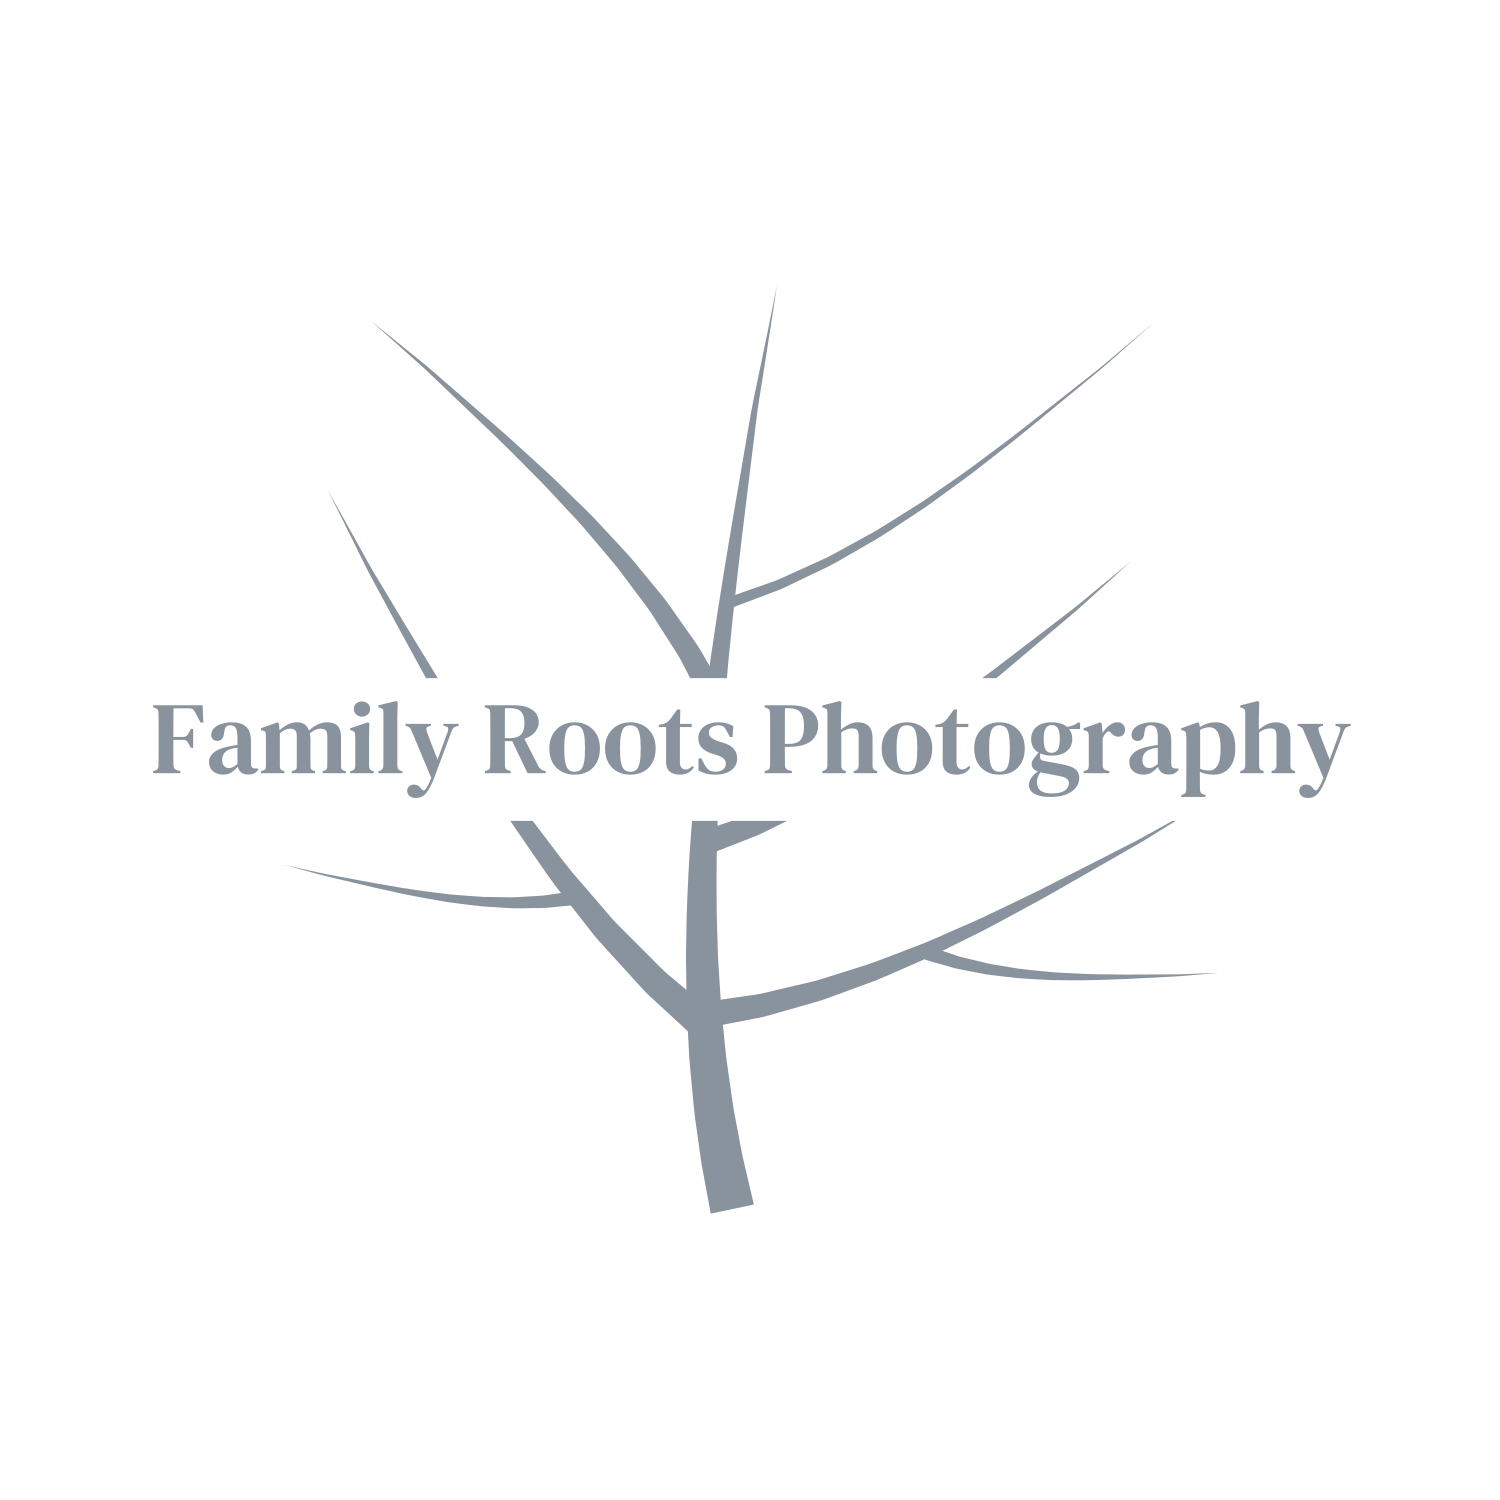 Family Roots Photography